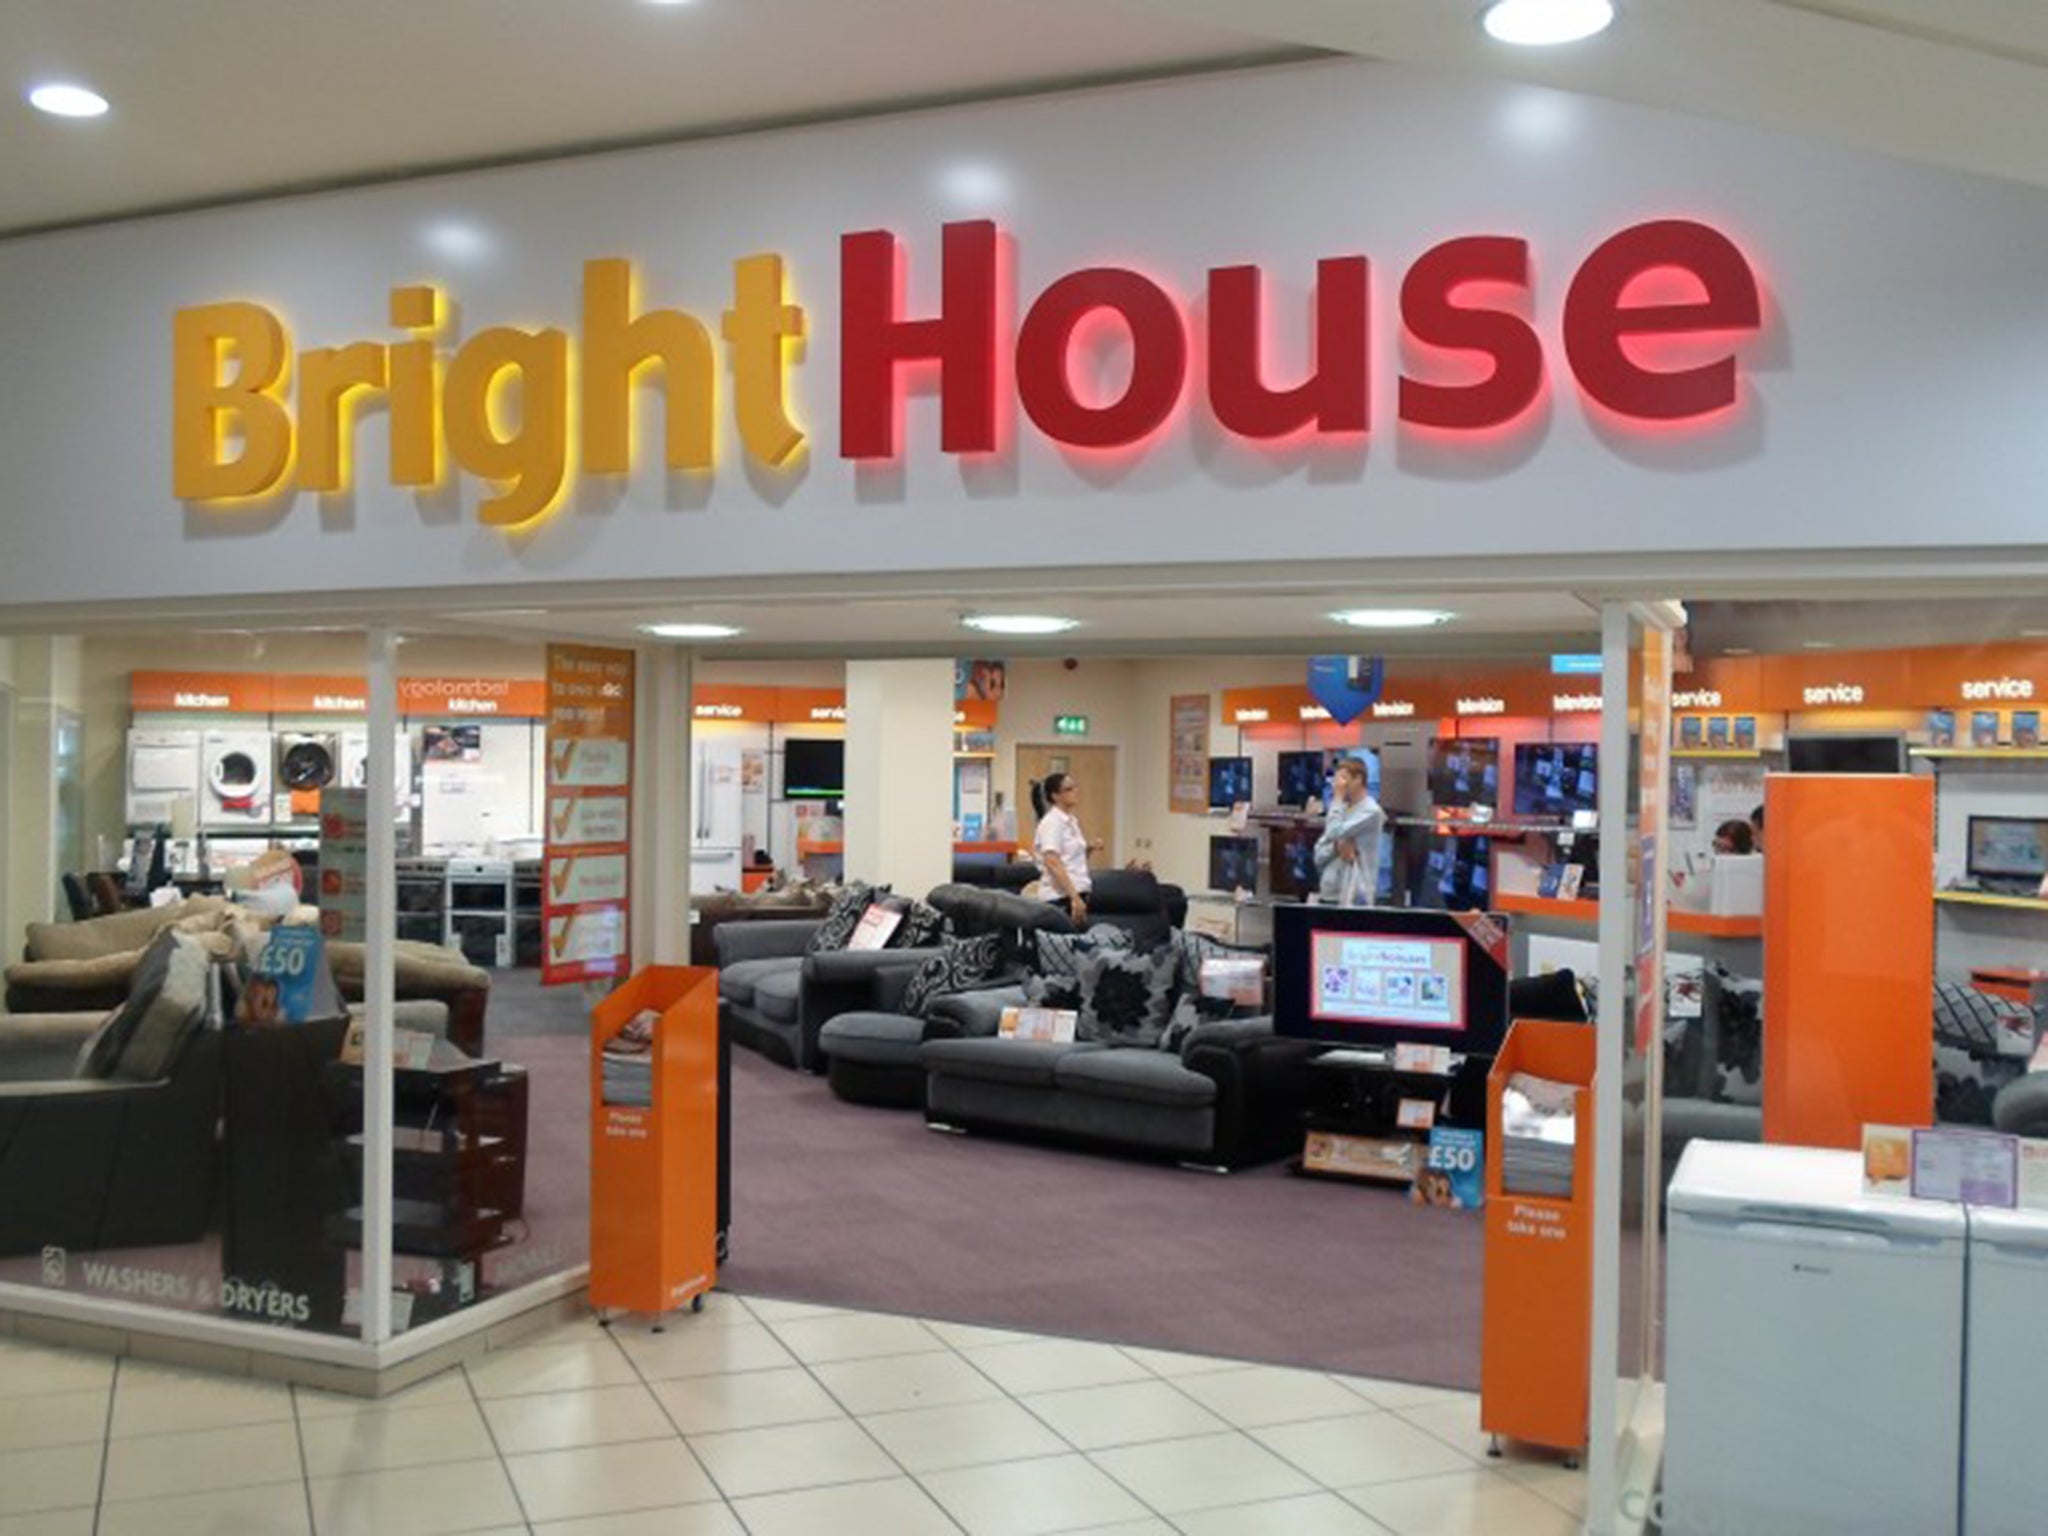 Rent-to-own retailers such as BrightHouse have been accused of forcing people to take out expensive warranties and insurance